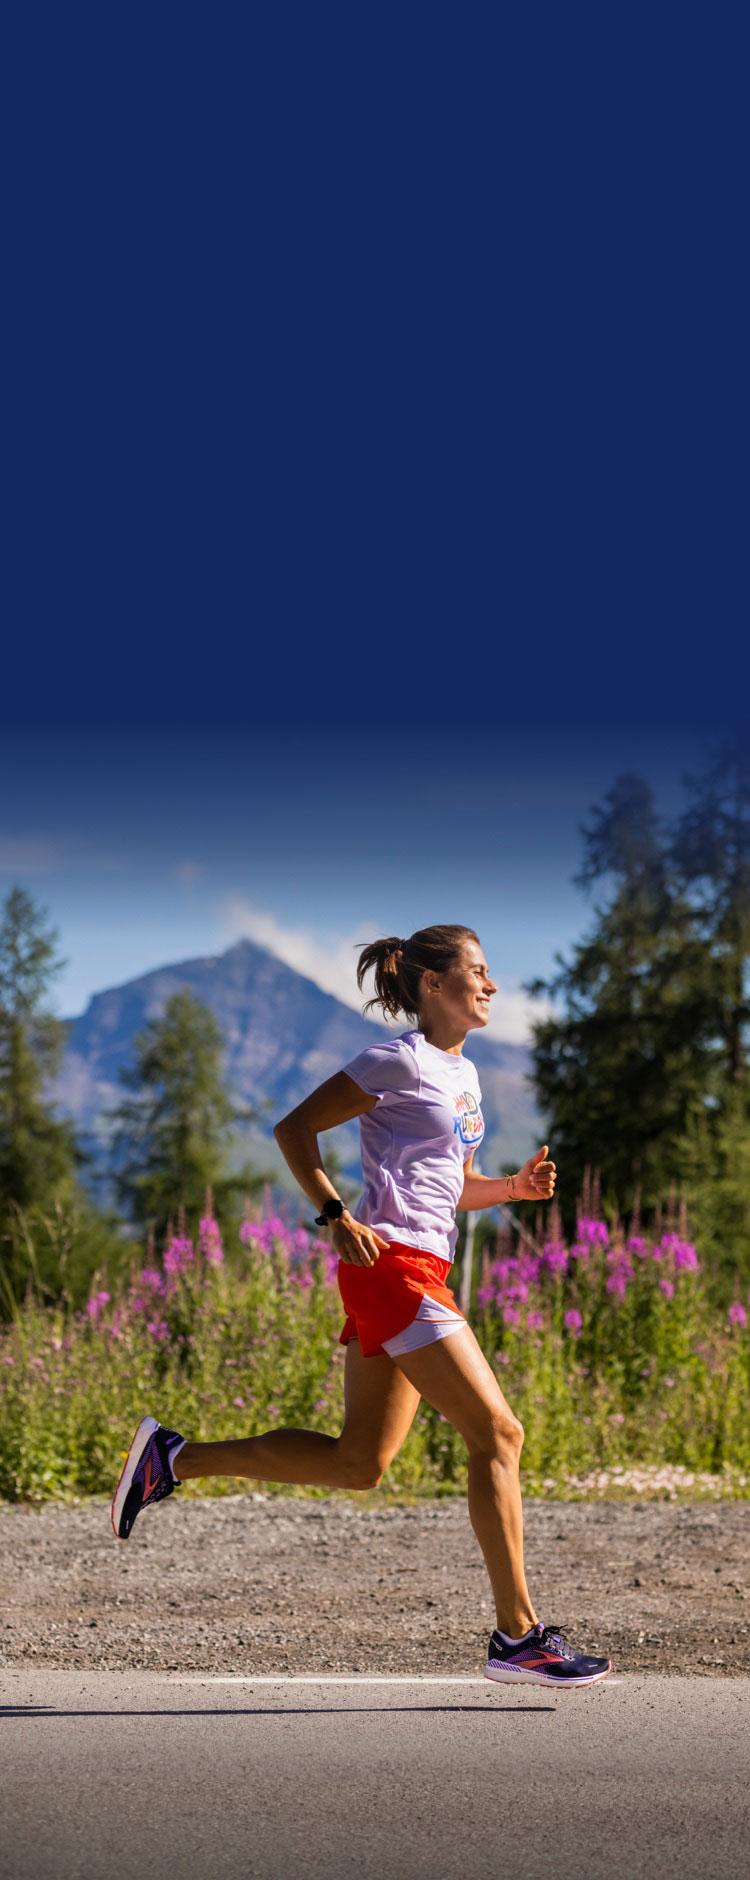 Female runner on road with flowers and mountains in the background